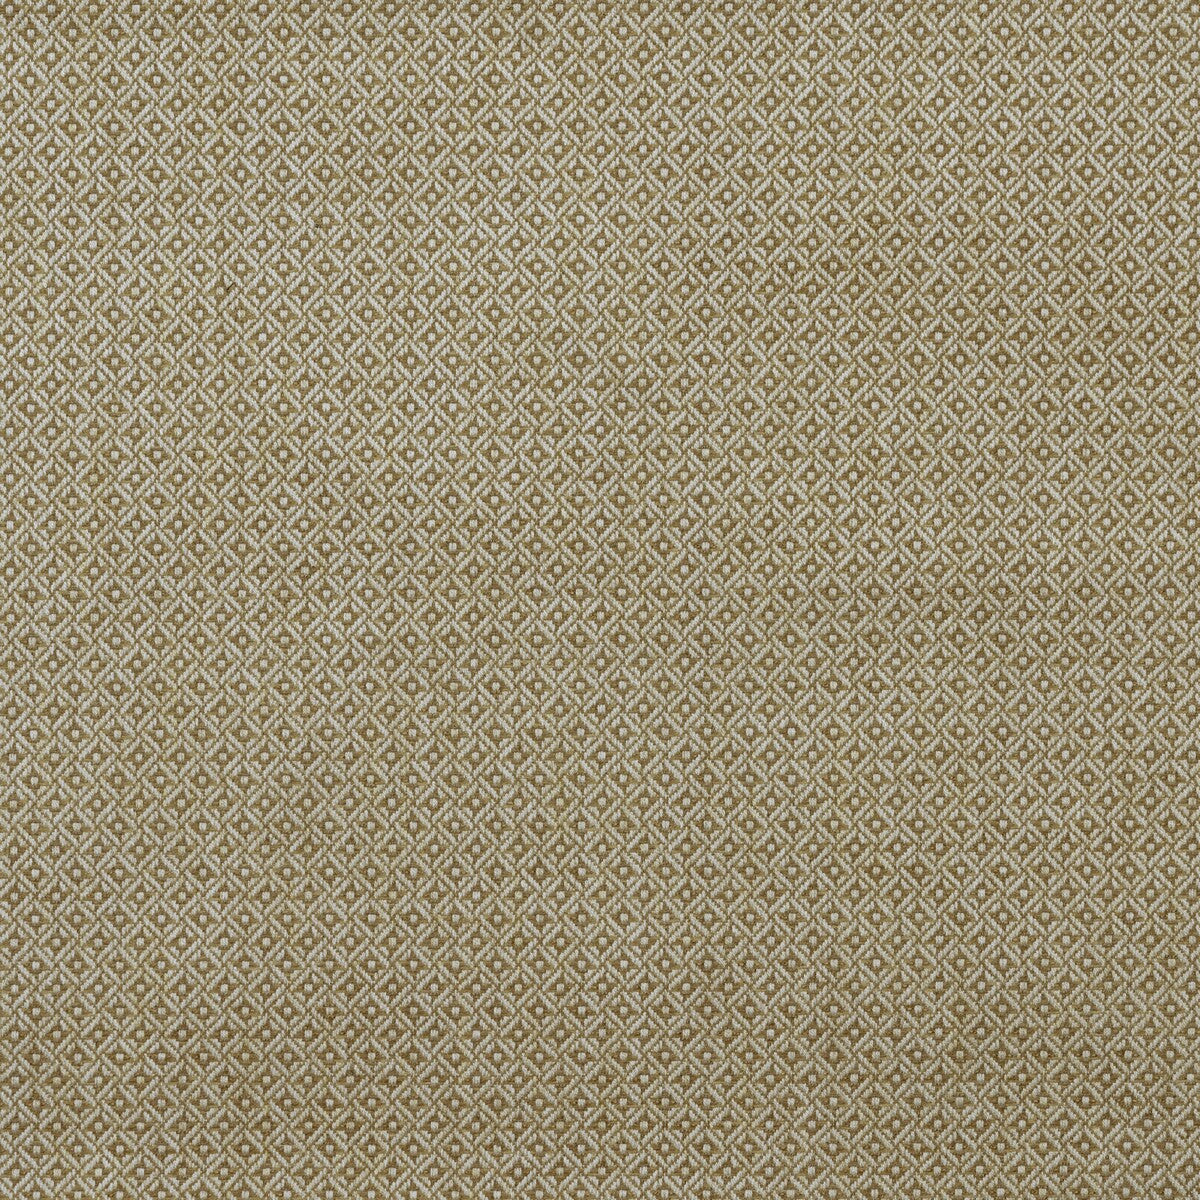 Cavendish fabric in wheat color - pattern BFC-3677.164.0 - by Lee Jofa in the Blithfield collection